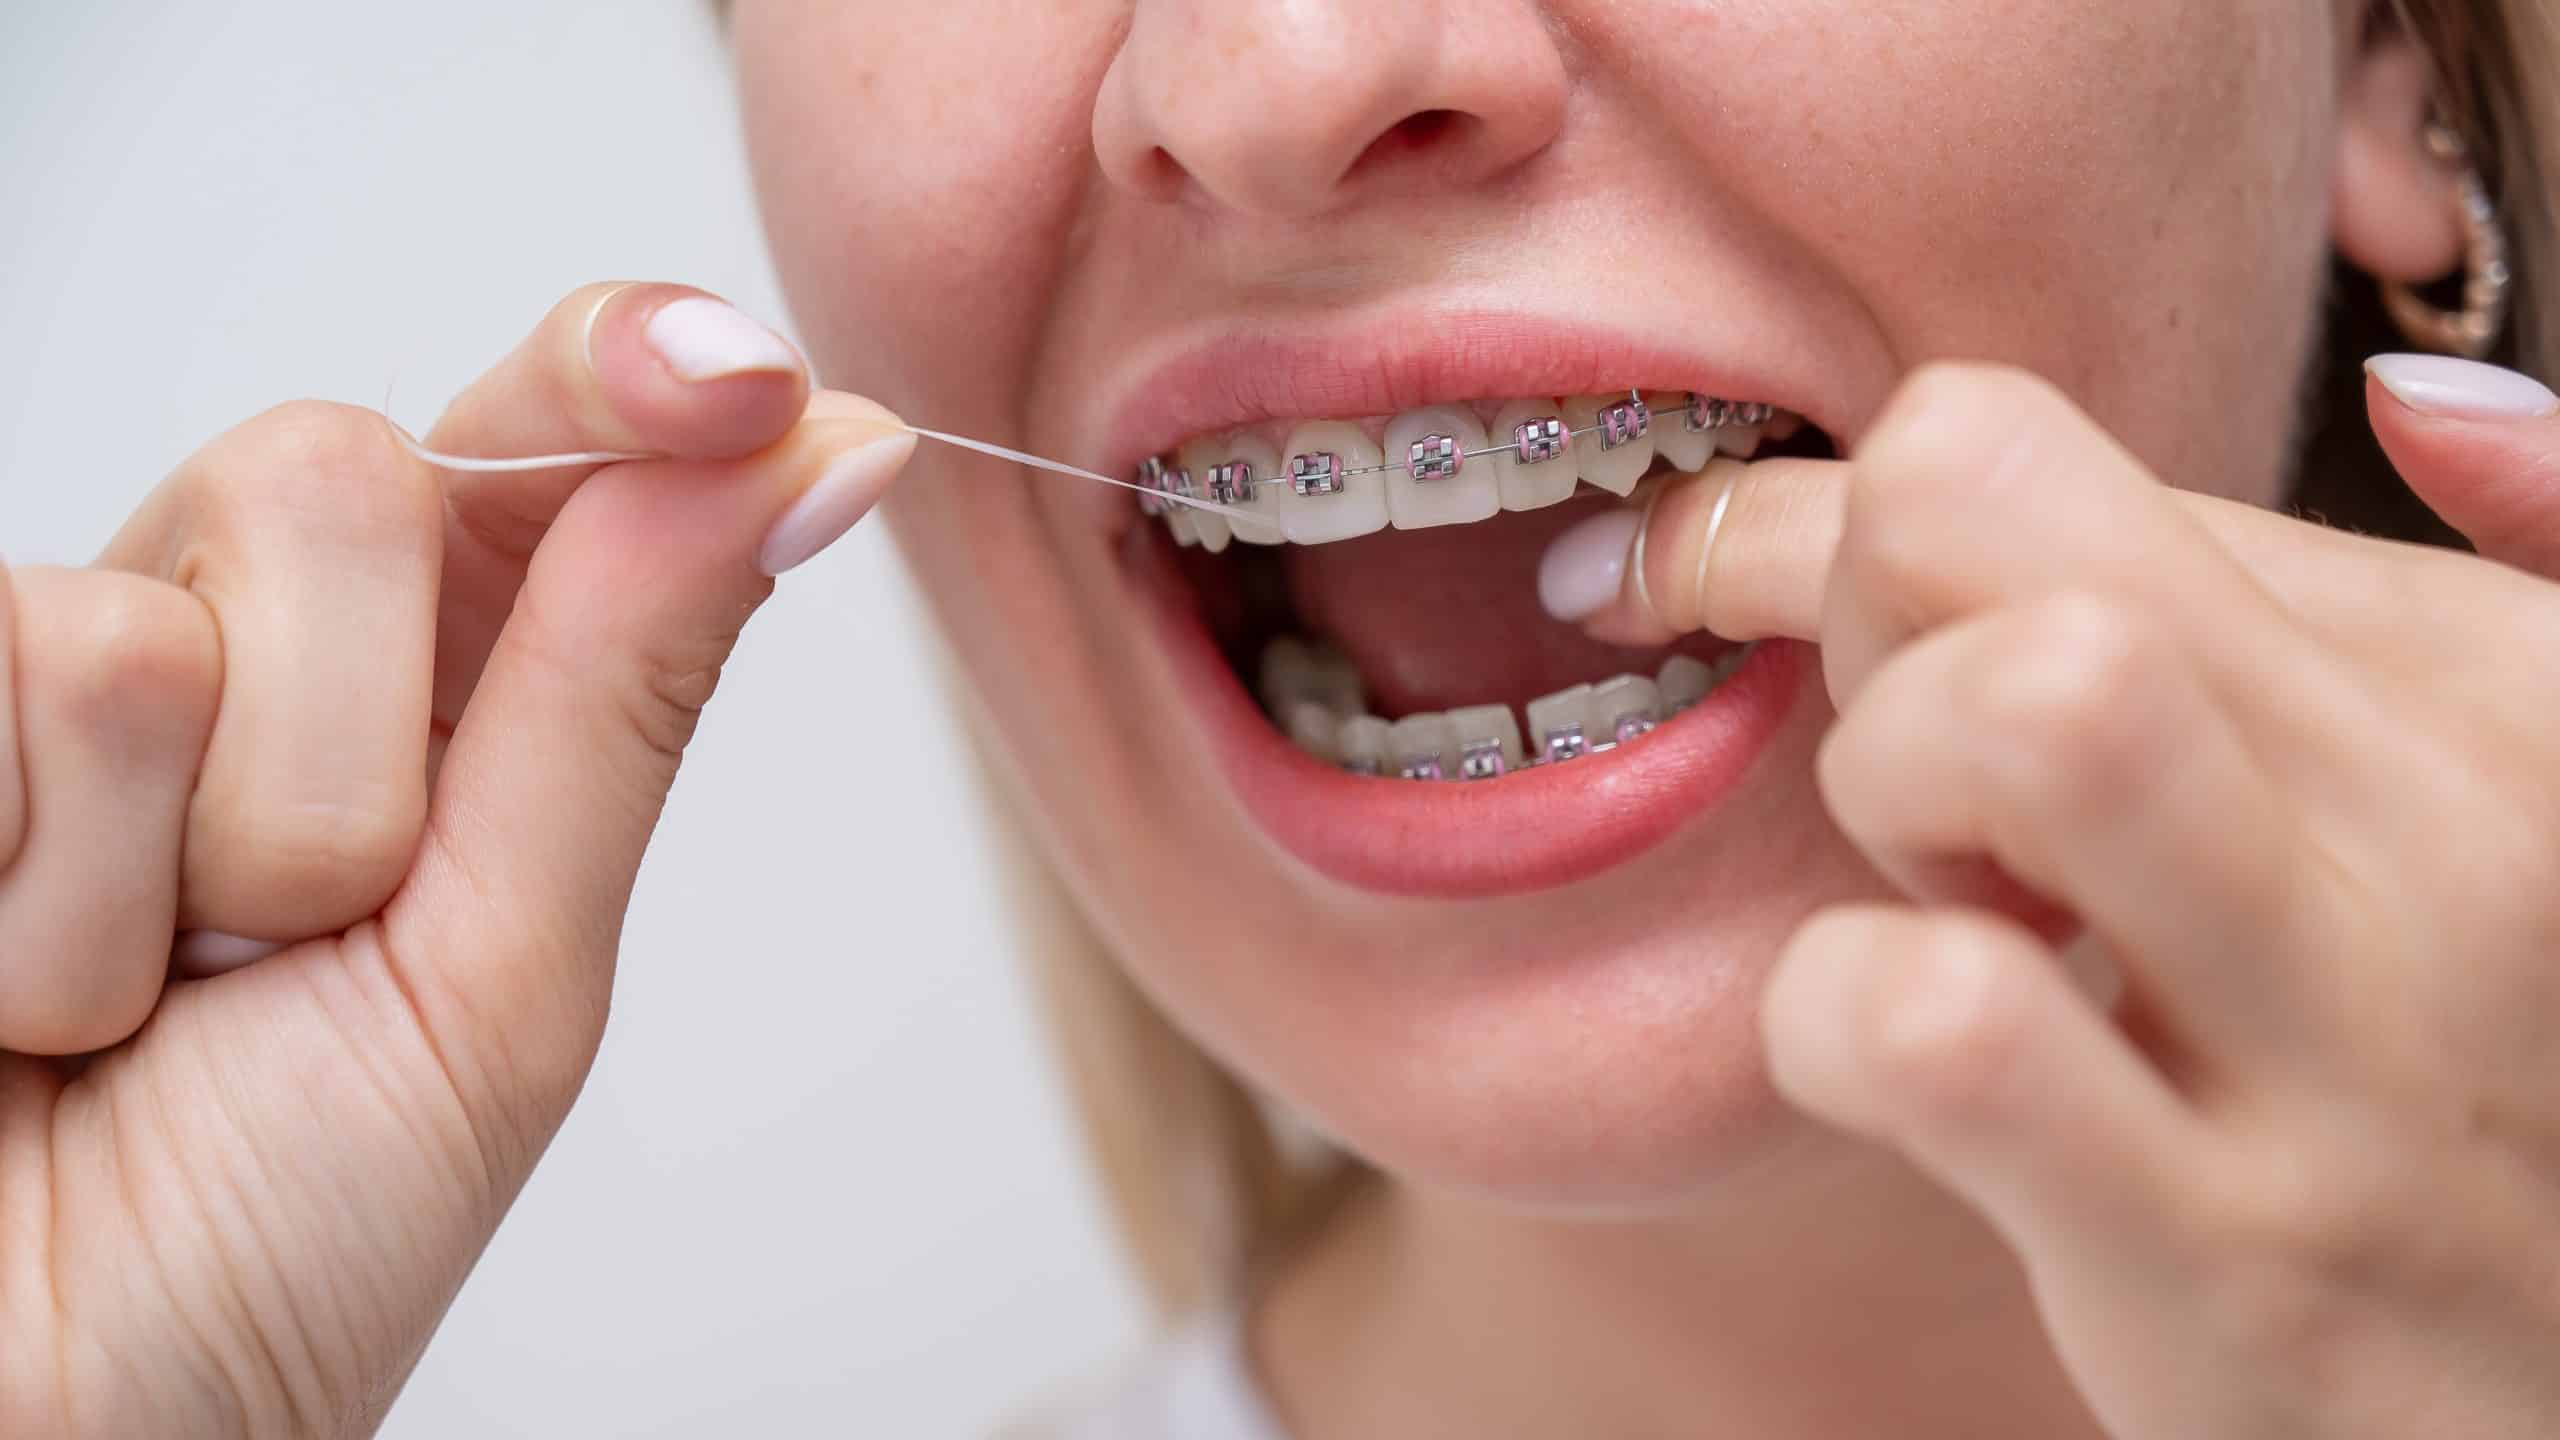 Flossing also helps prevent gum disease